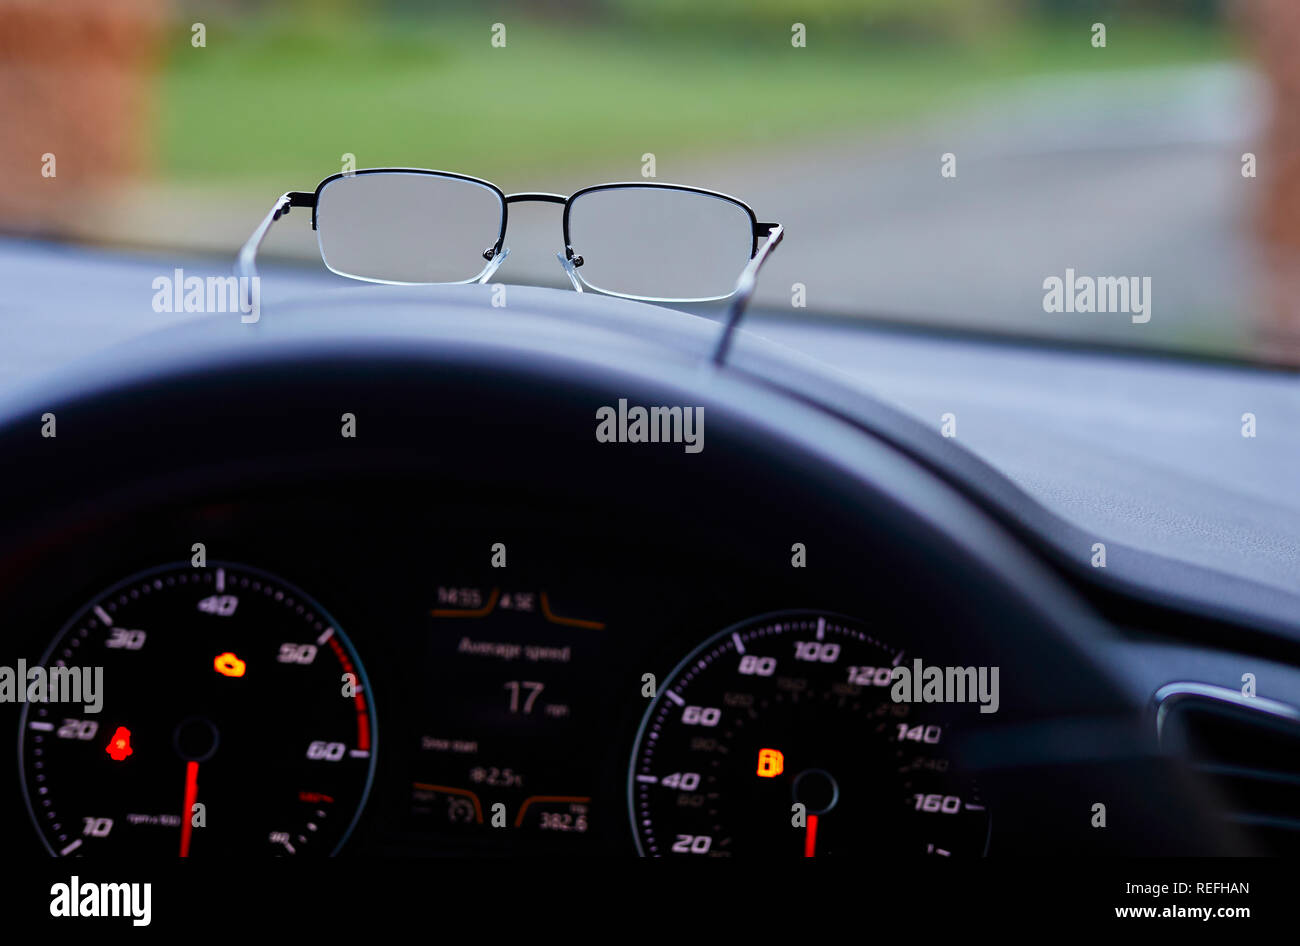 Pair of glasses on dashboard of car Stock Photo